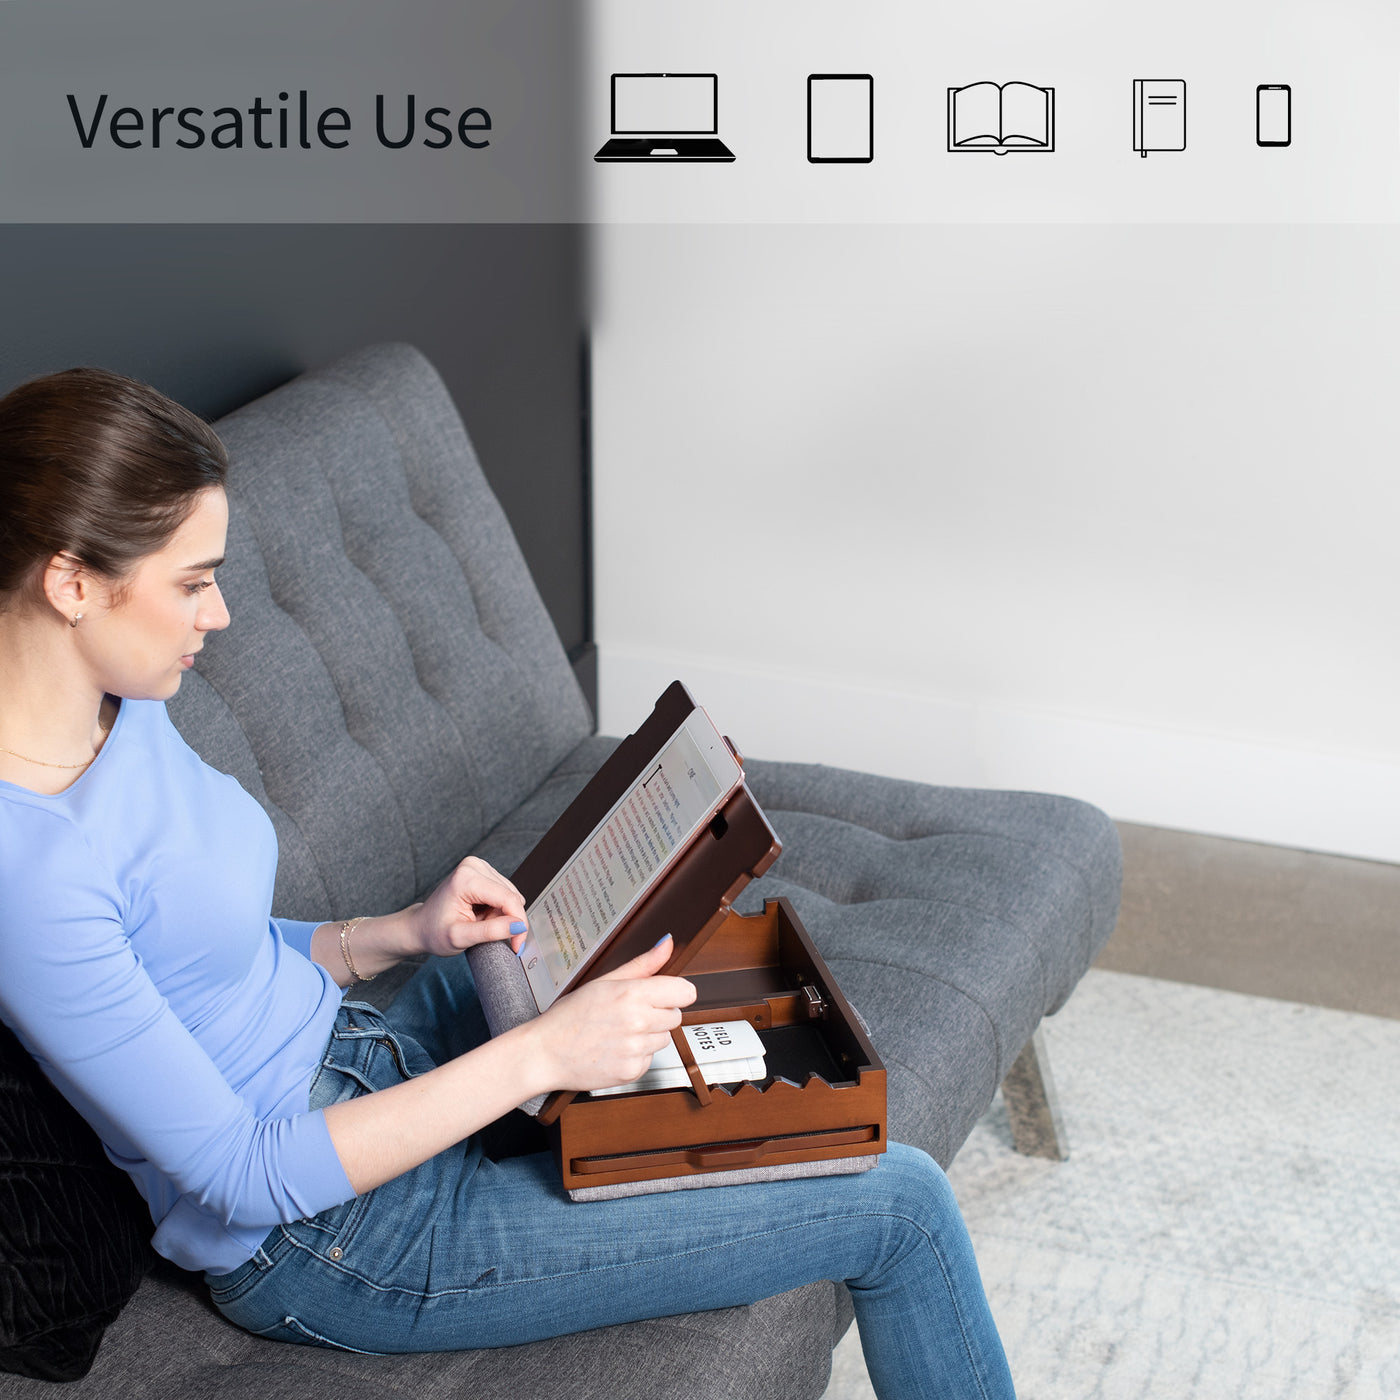 Wooden Lap Desk with Storage and Mouse Pad – VIVO - desk solutions, screen  mounting, and more